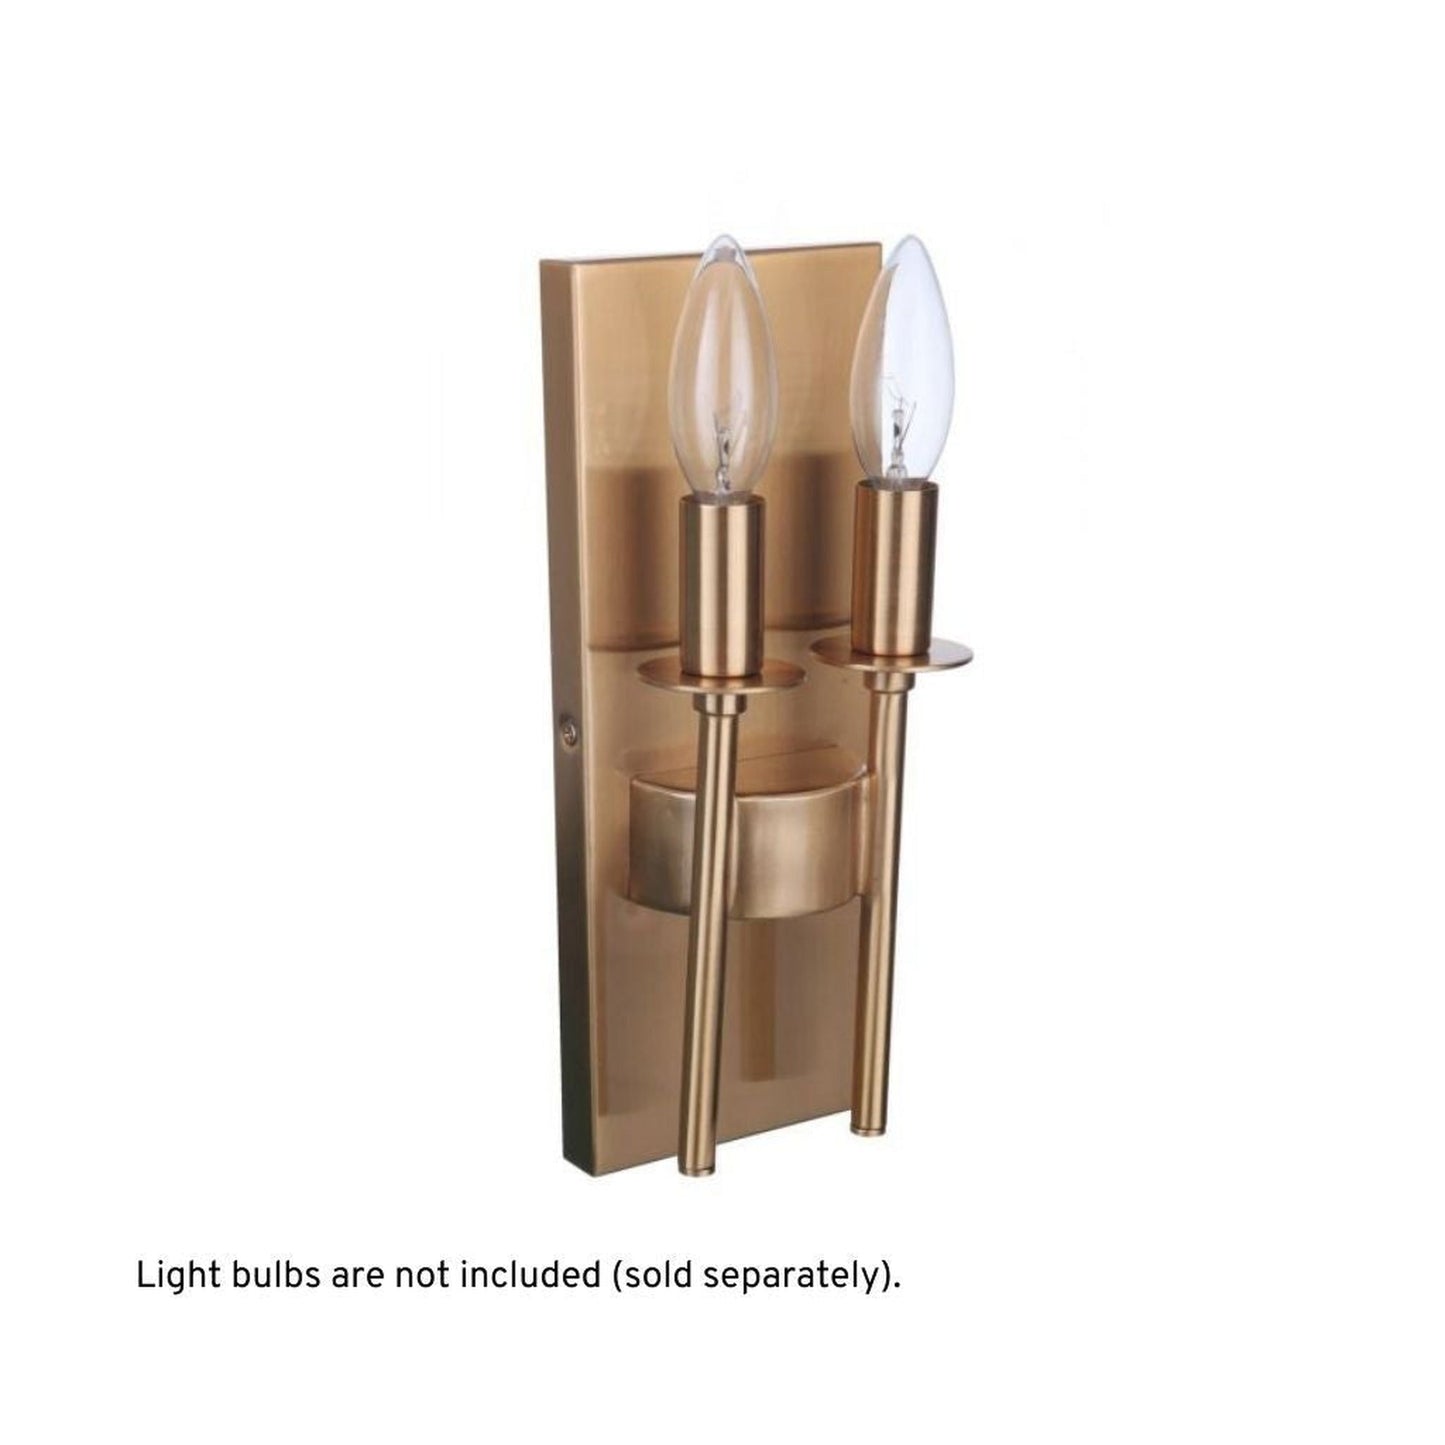 Craftmade Larrson 5" x 11" 2-Light Satin Brass Candle-Style Wall Sconce